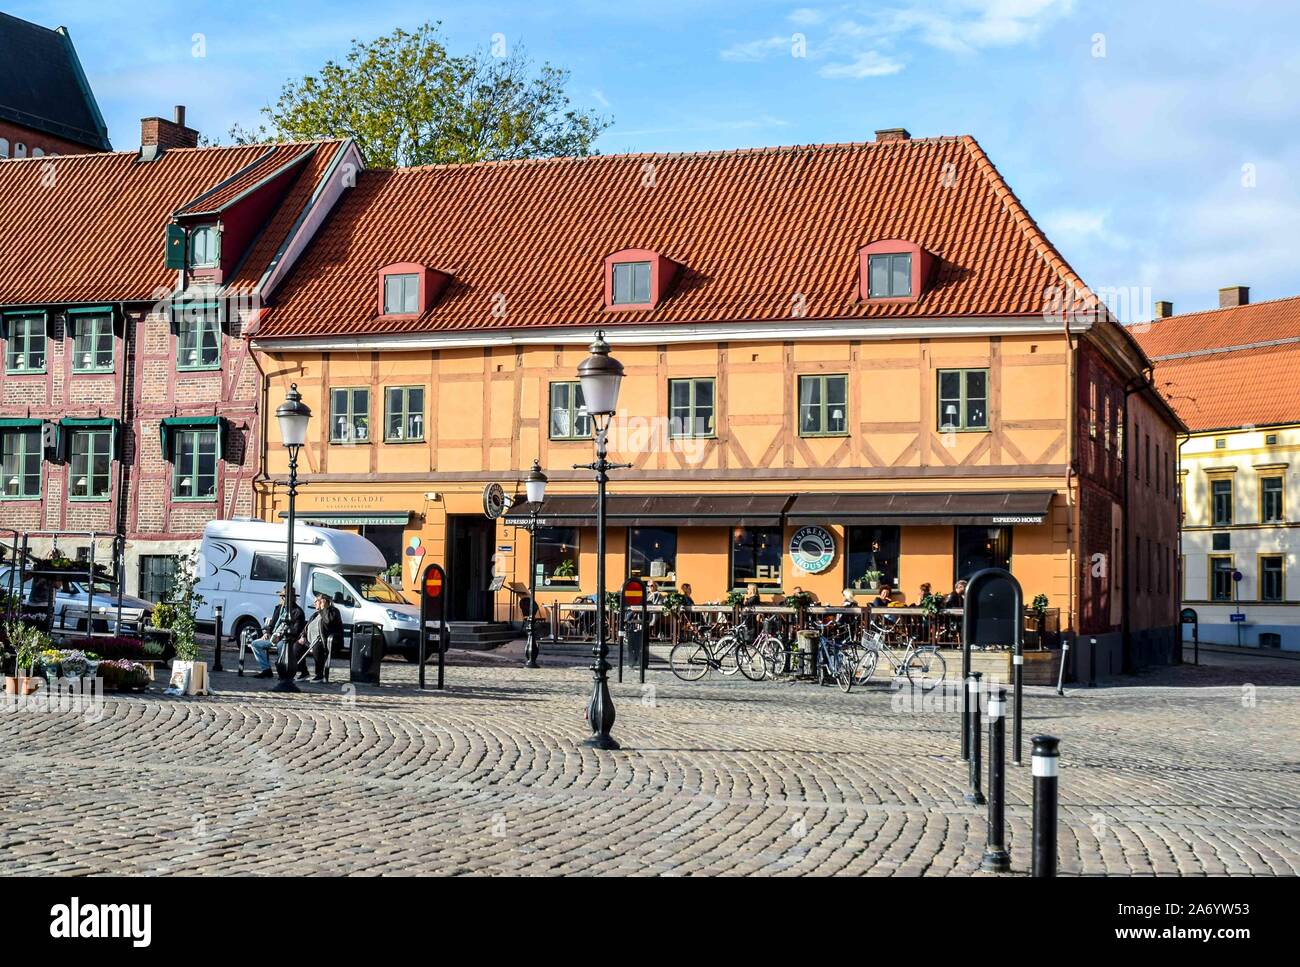 Colourful old town Ystad Sweden on a sunny day. Stock Photo